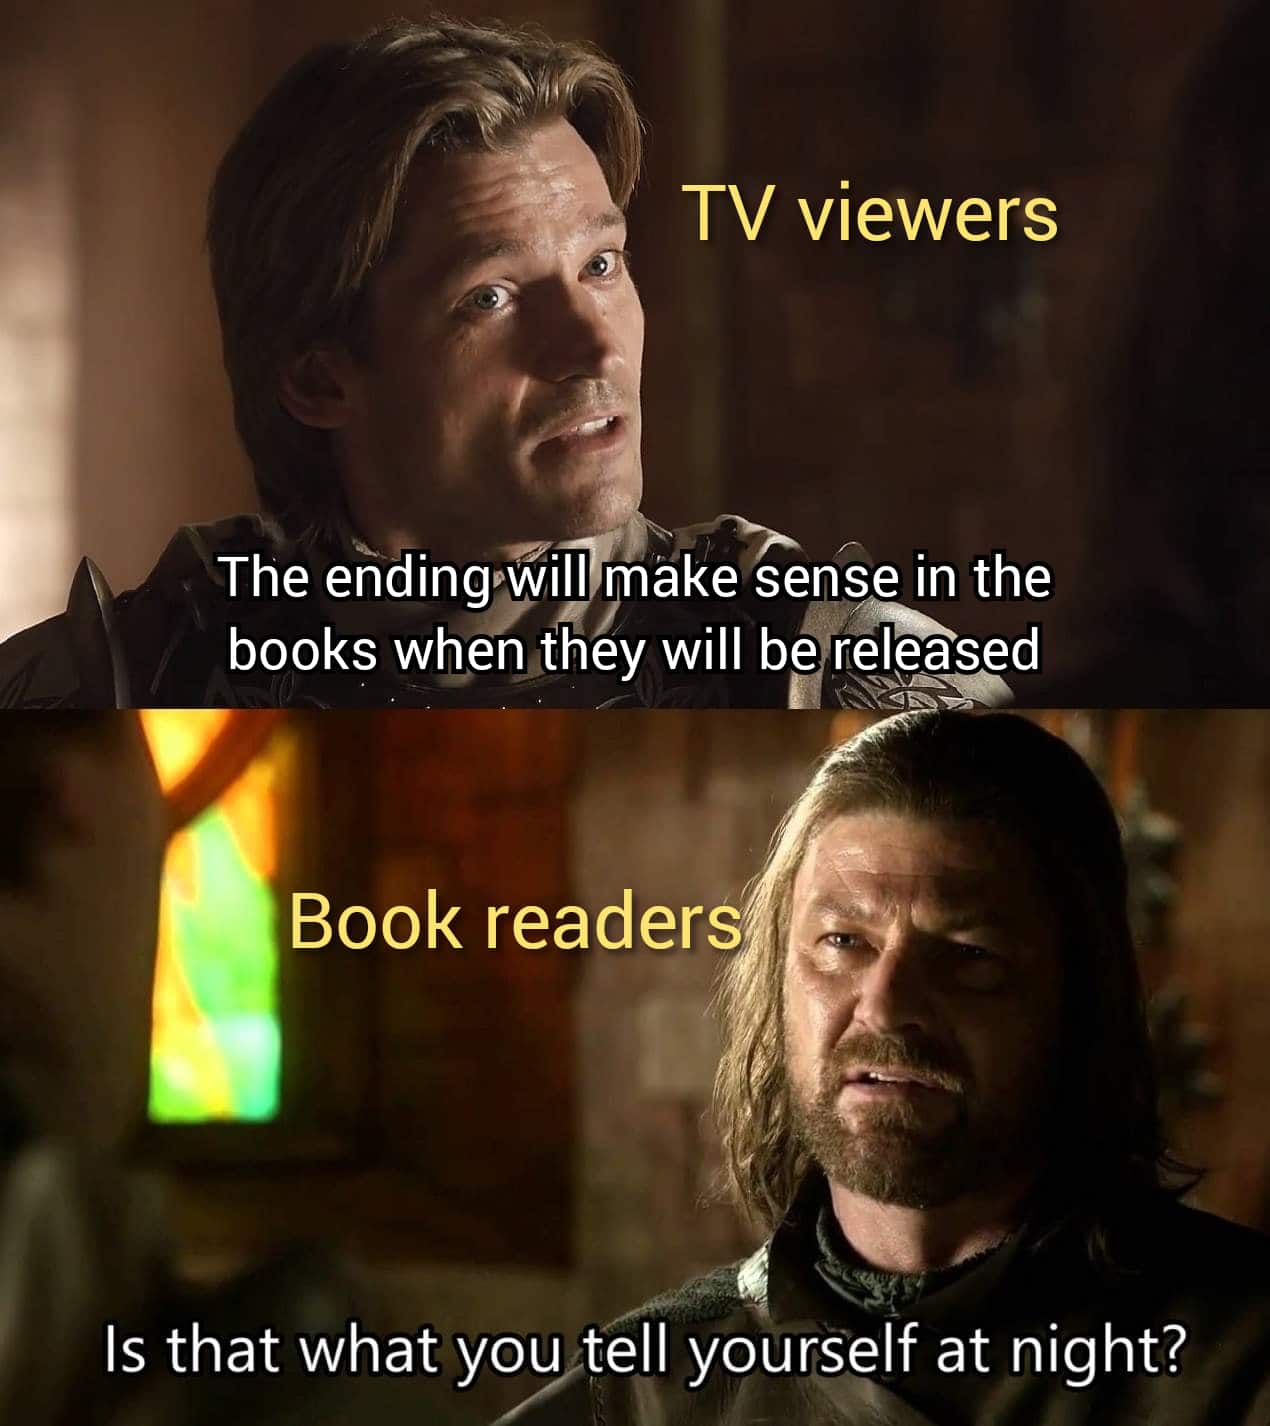 game-of-thrones game-of-thrones-memes game-of-thrones text: TV viewers The endingpwill make sense in the books wLemthey will be rele@sed Book readers Is that what you tell yourself at night? 